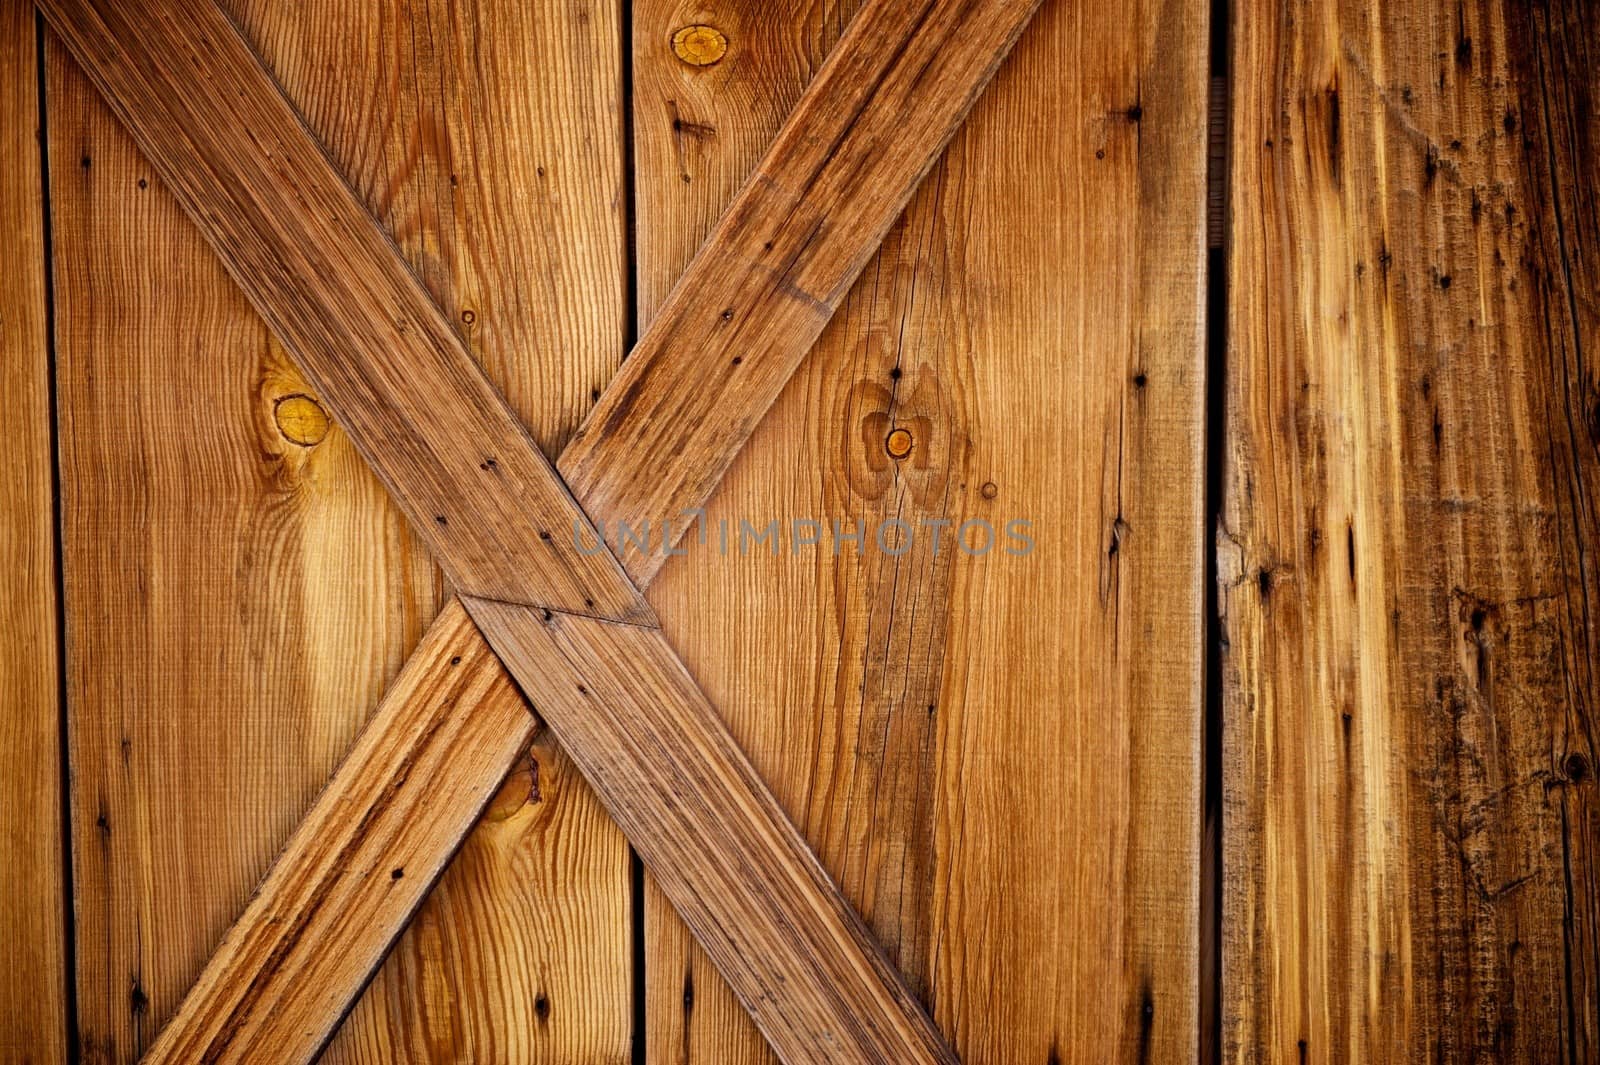 Barn door details with weathered and worn wood planks that include rusty nails and knots